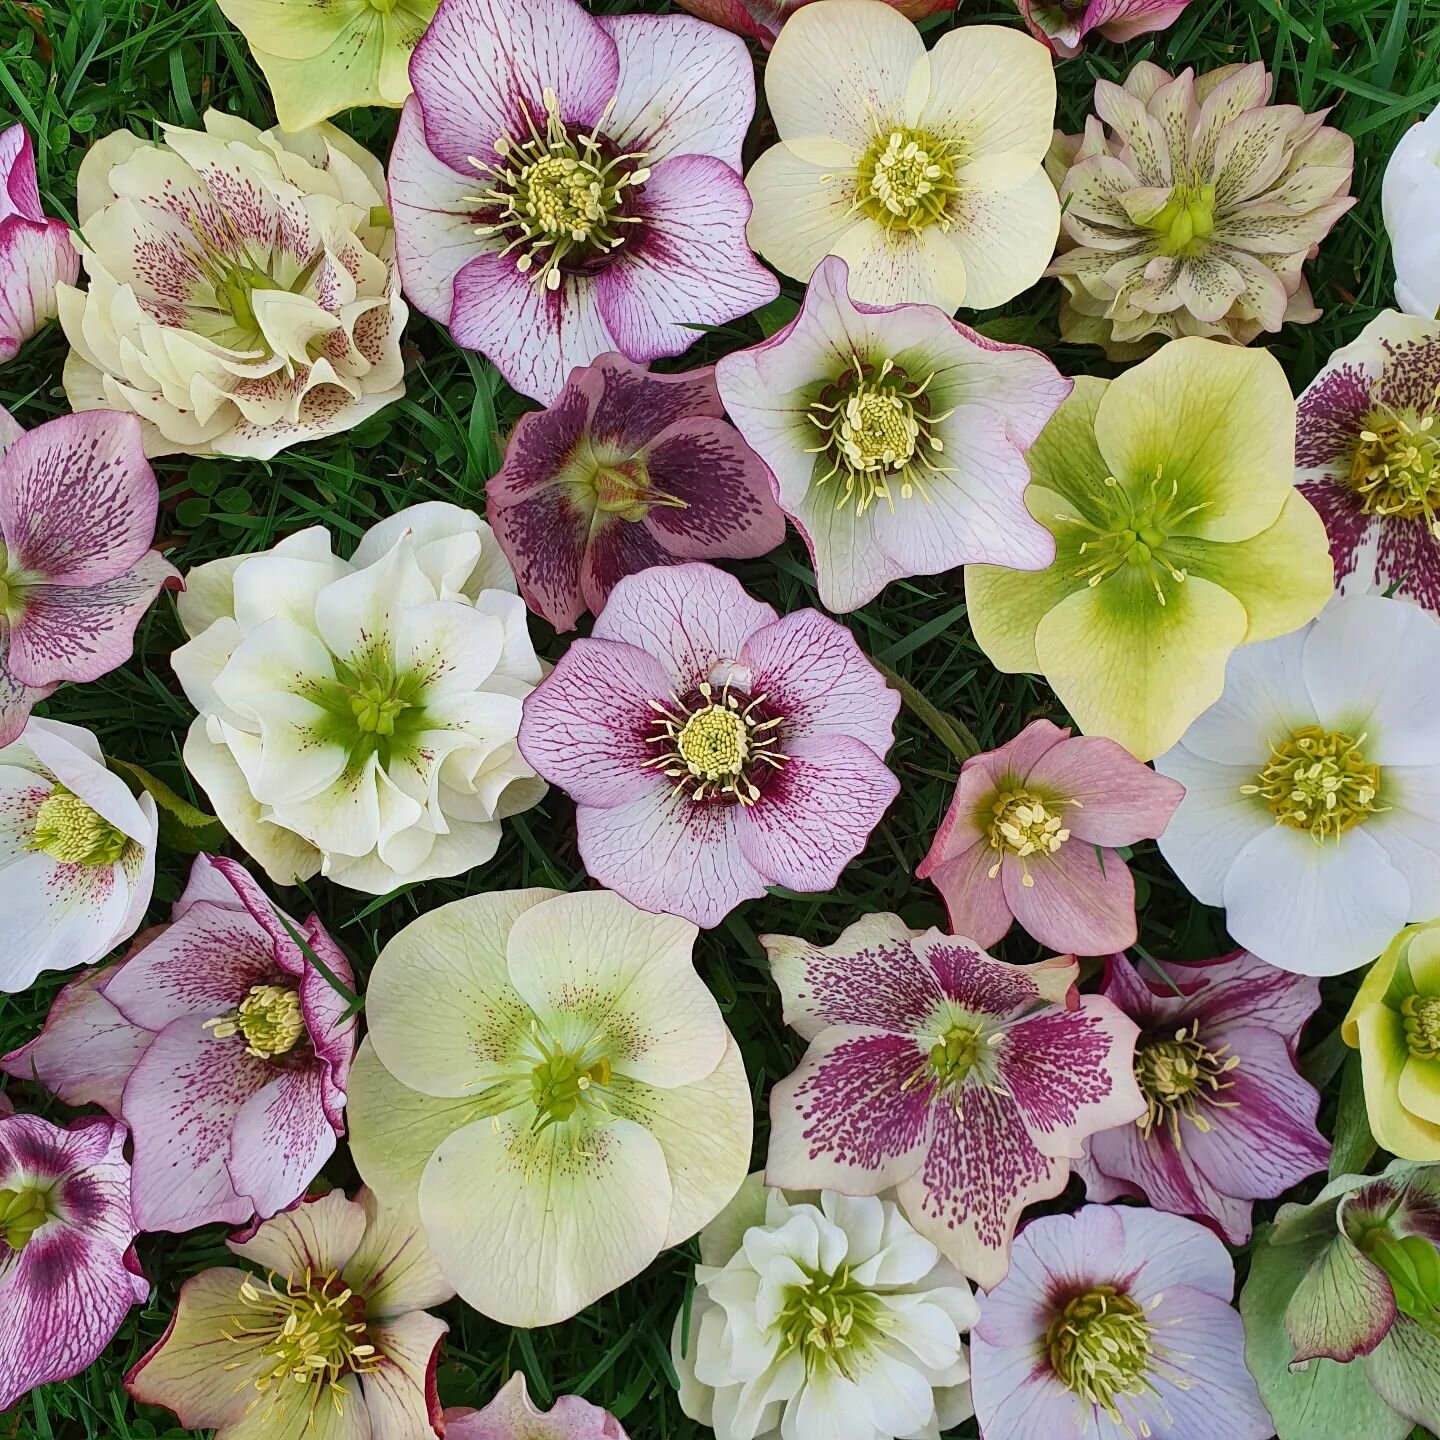 Hellebore season in the garden. I'm constantly delighted with the myriad of patterns, forms and colours that evolve in these through the generations.

#mggardens #gardensofinstagram #gardendesign #landscapedesign #plantingdesign #helleborus